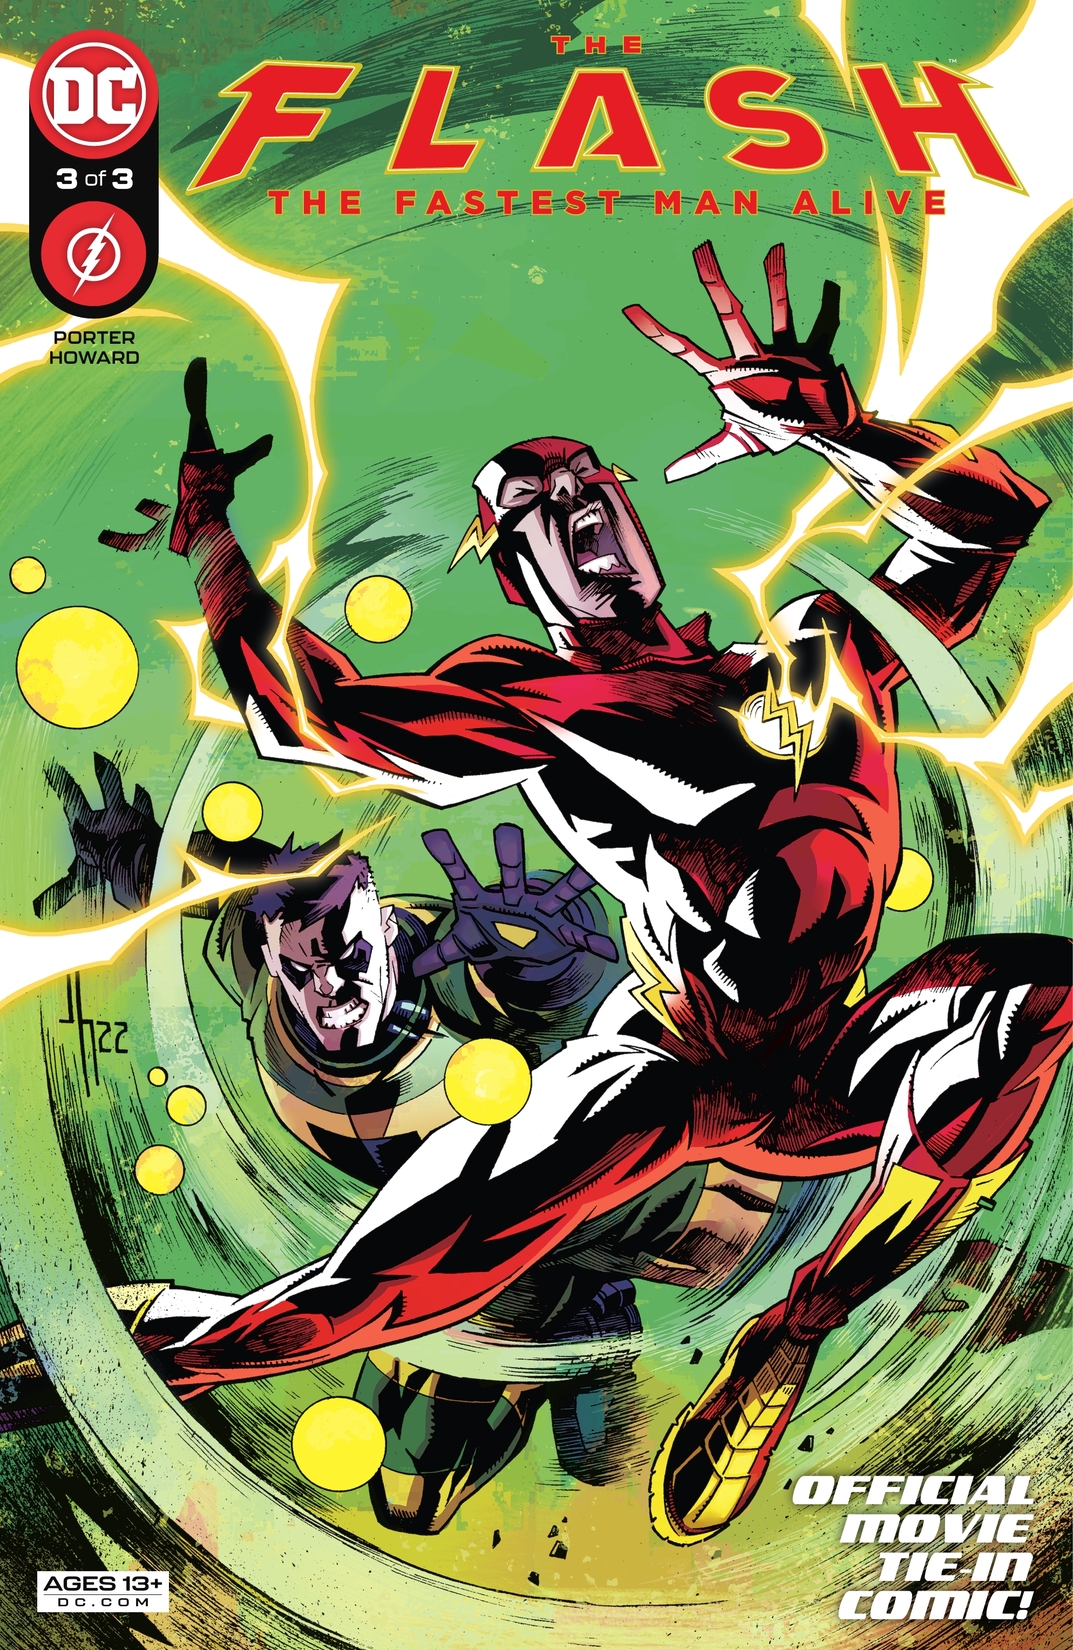 The Flash: The Fastest Man Alive #3 preview images